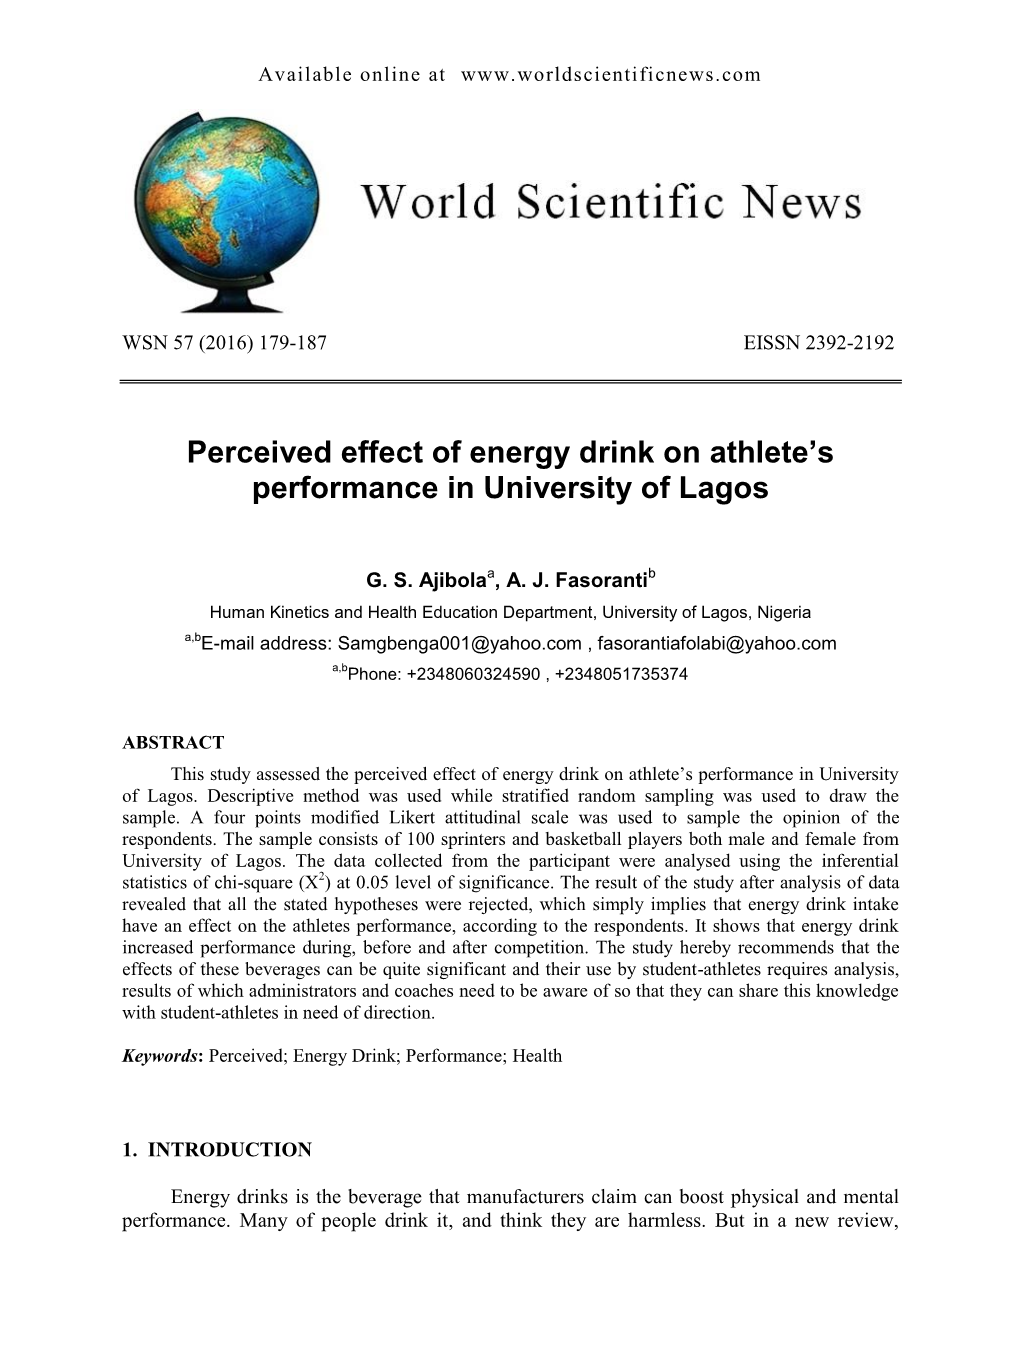 Perceived Effect of Energy Drink on Athlete's Performance in University